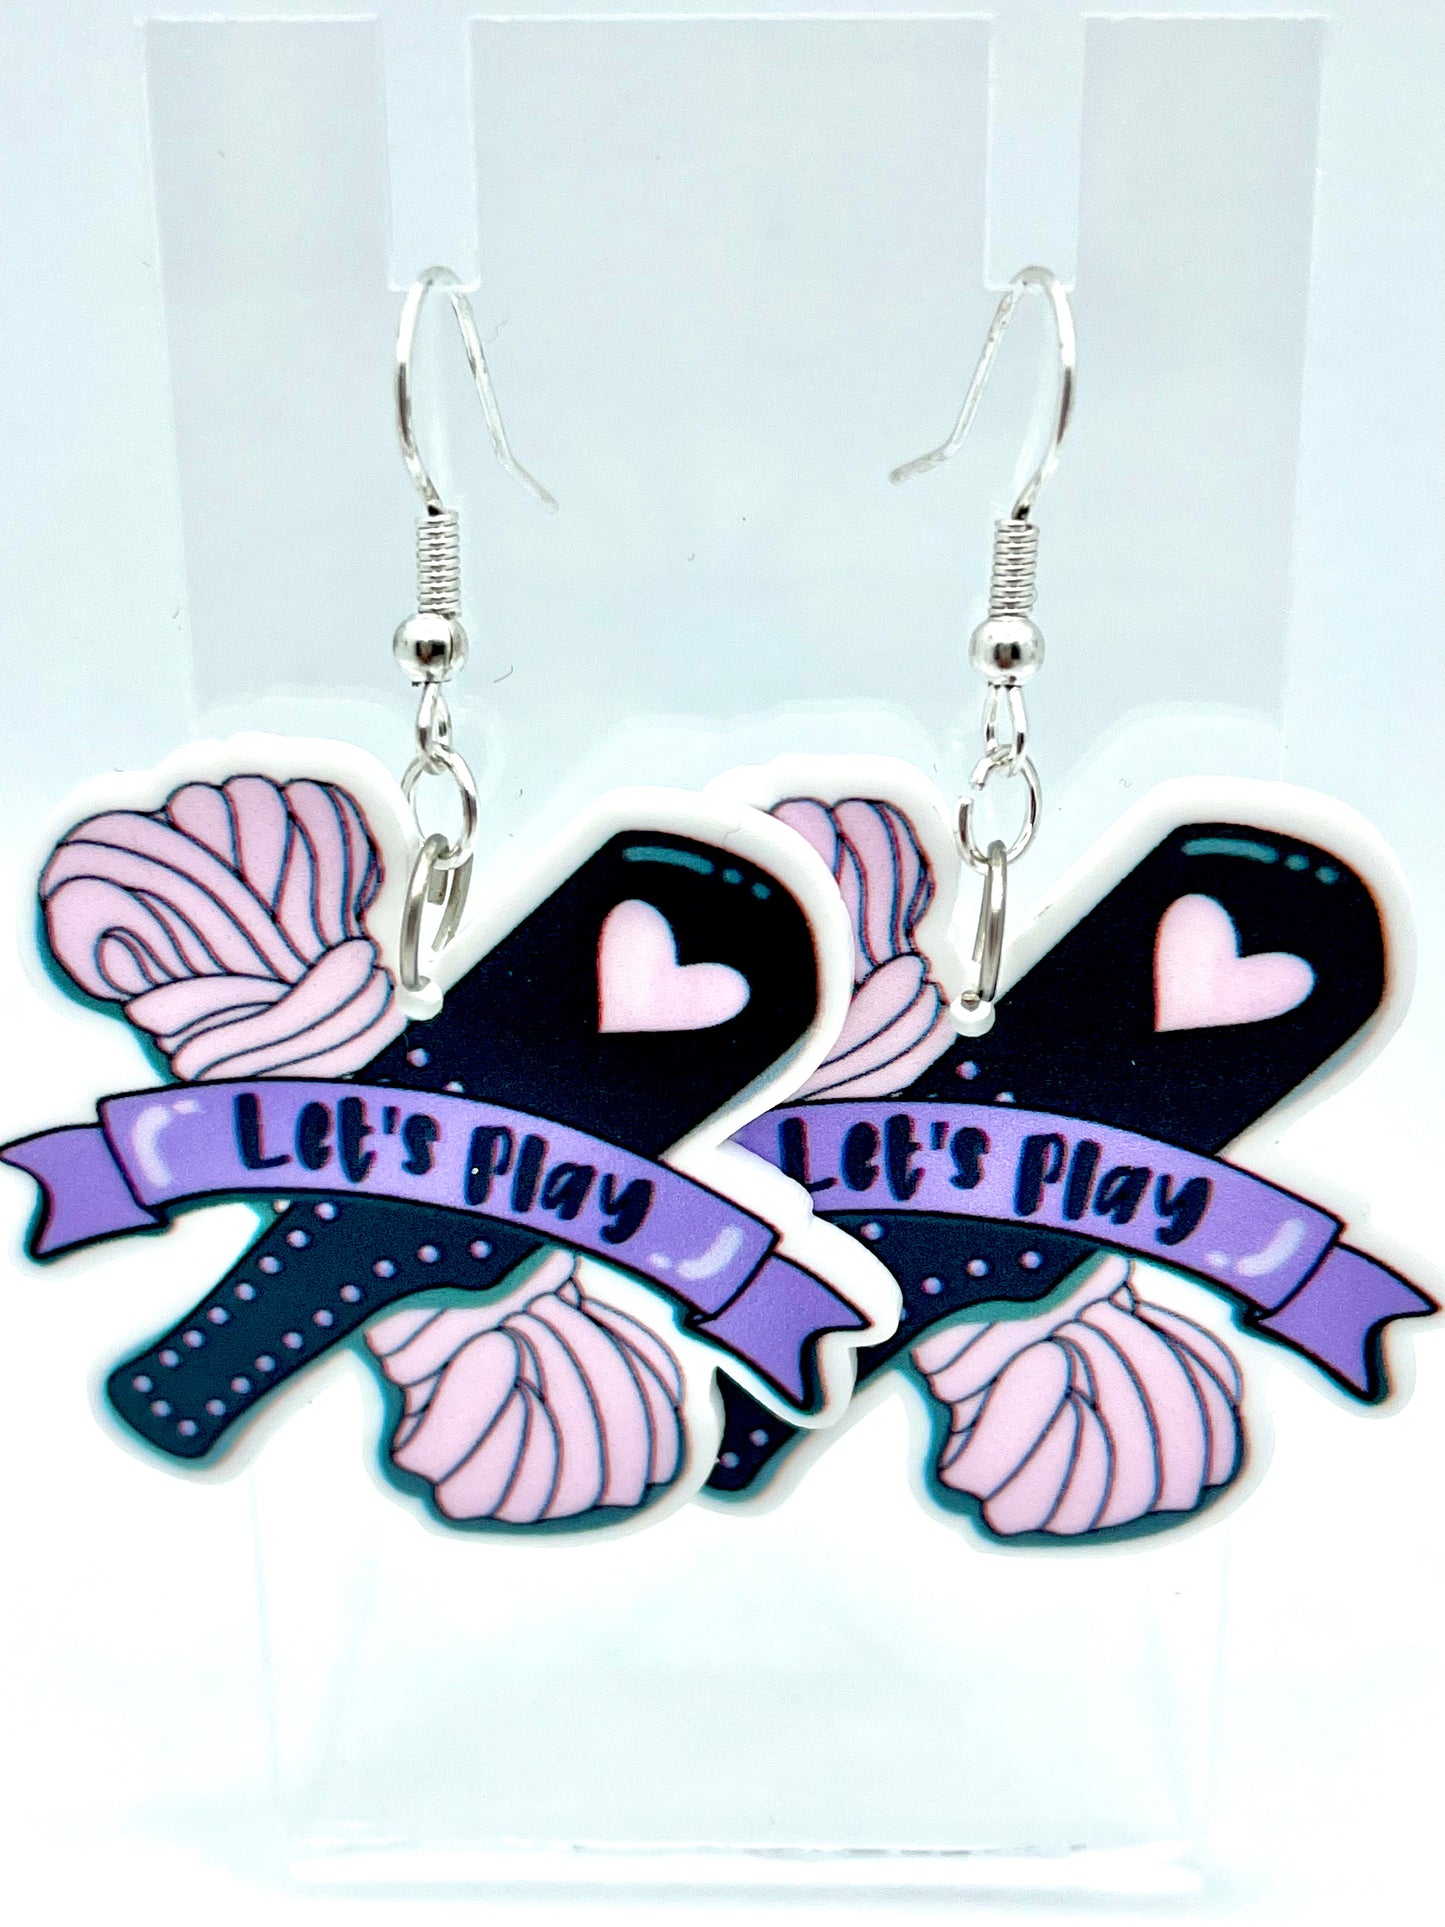 Let’s Play Paddle Rope Bunny Earrings